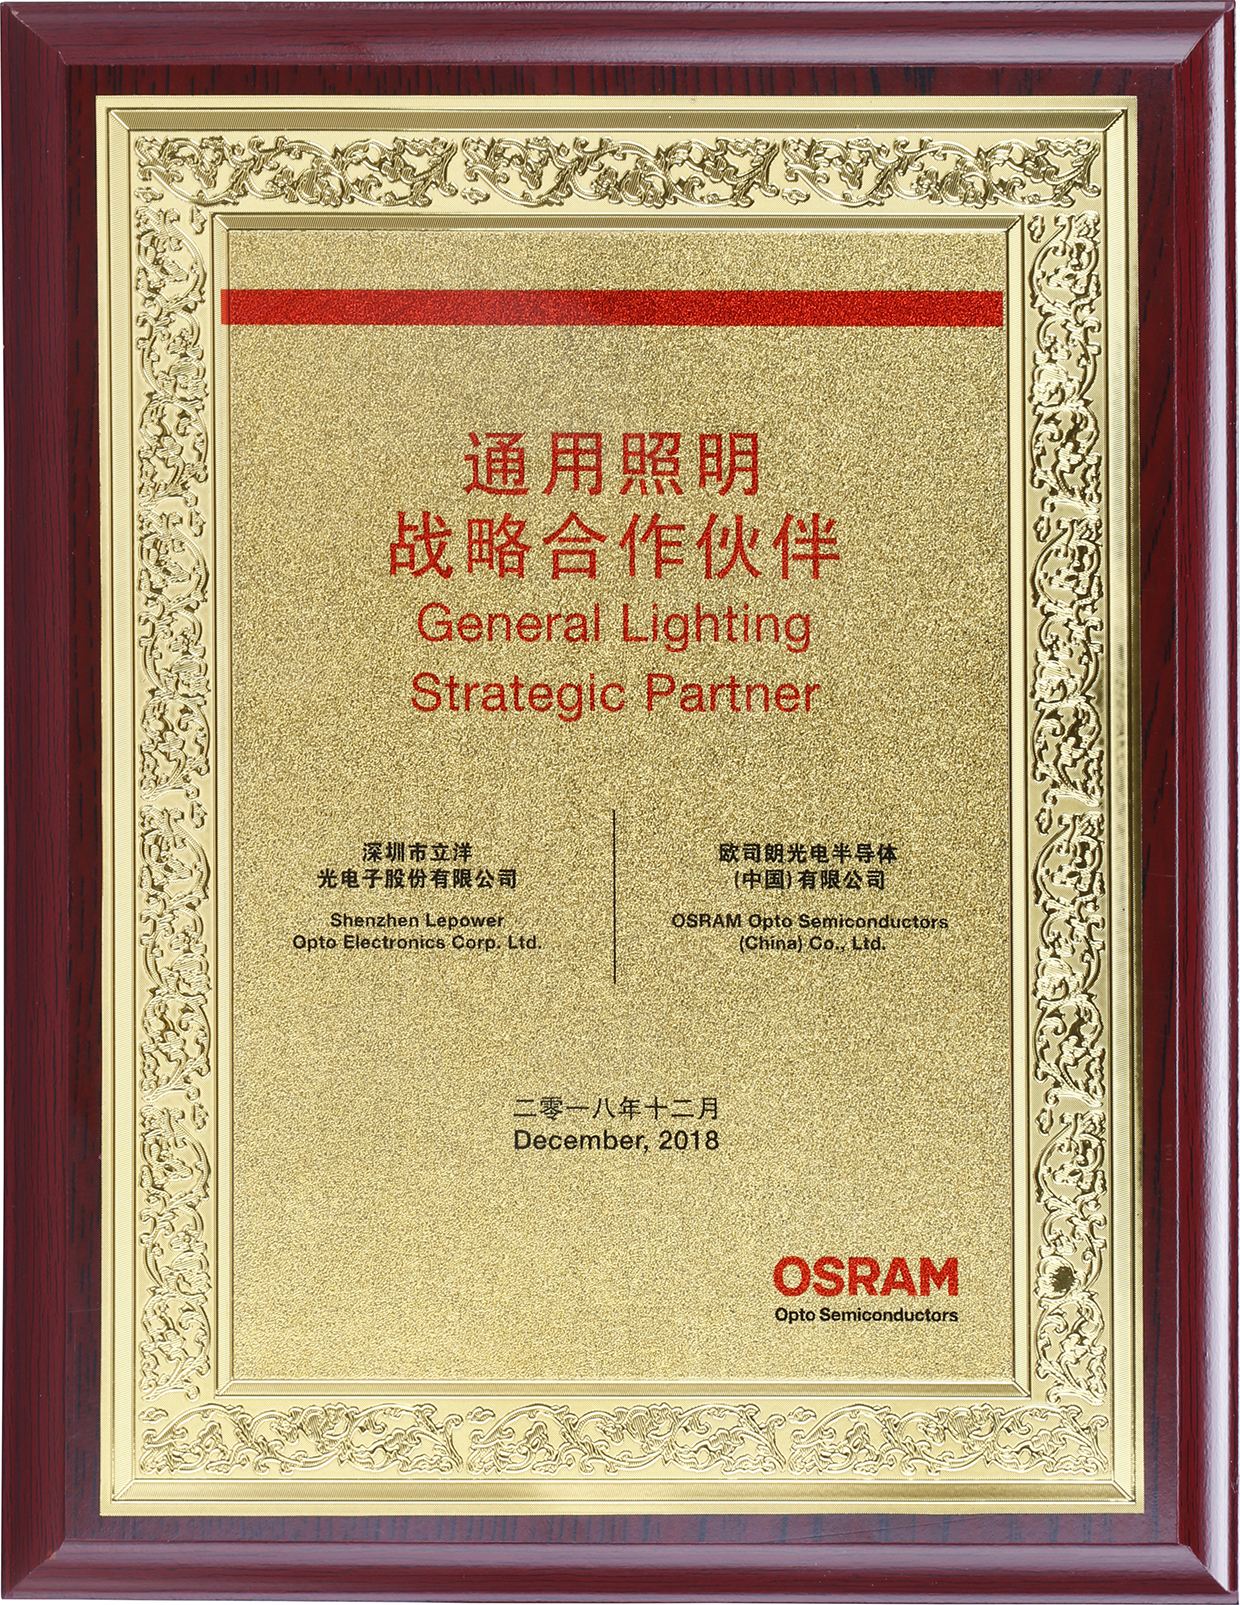 Lepower Shares and OSRAM started a strategic cooperation model